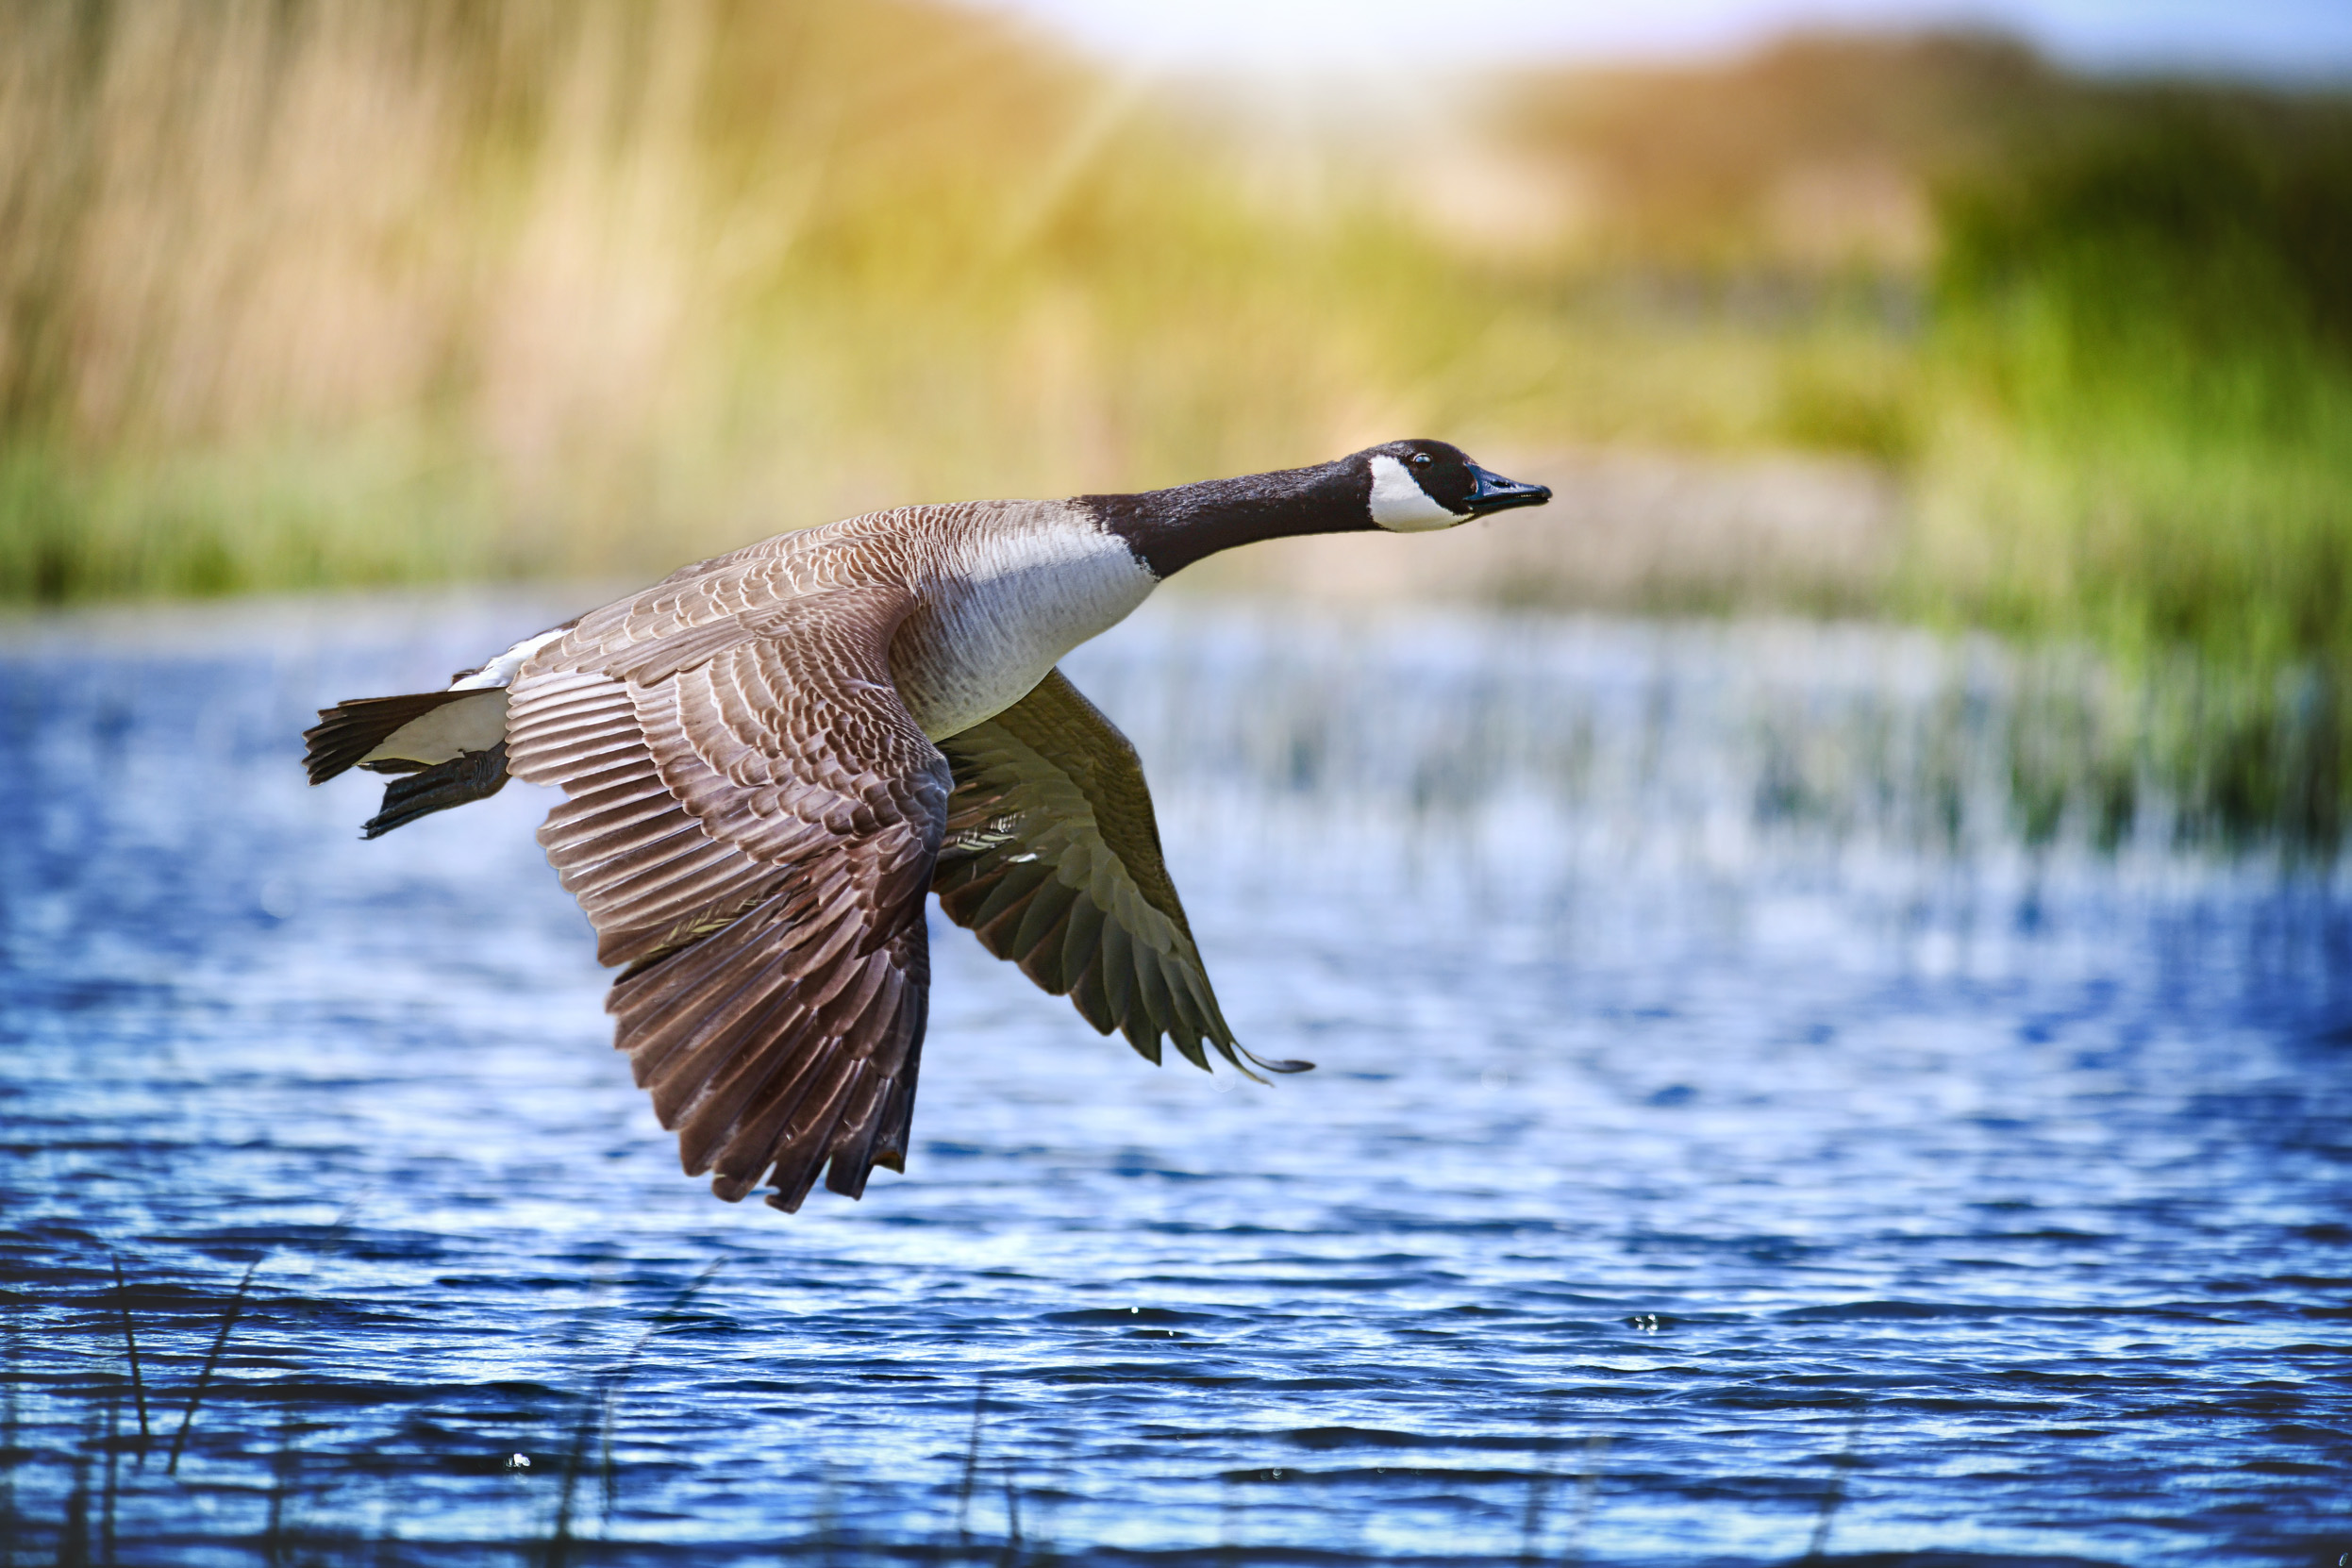 A lone Canada Goose low flying over a body of water with reedbeds surrounding. 